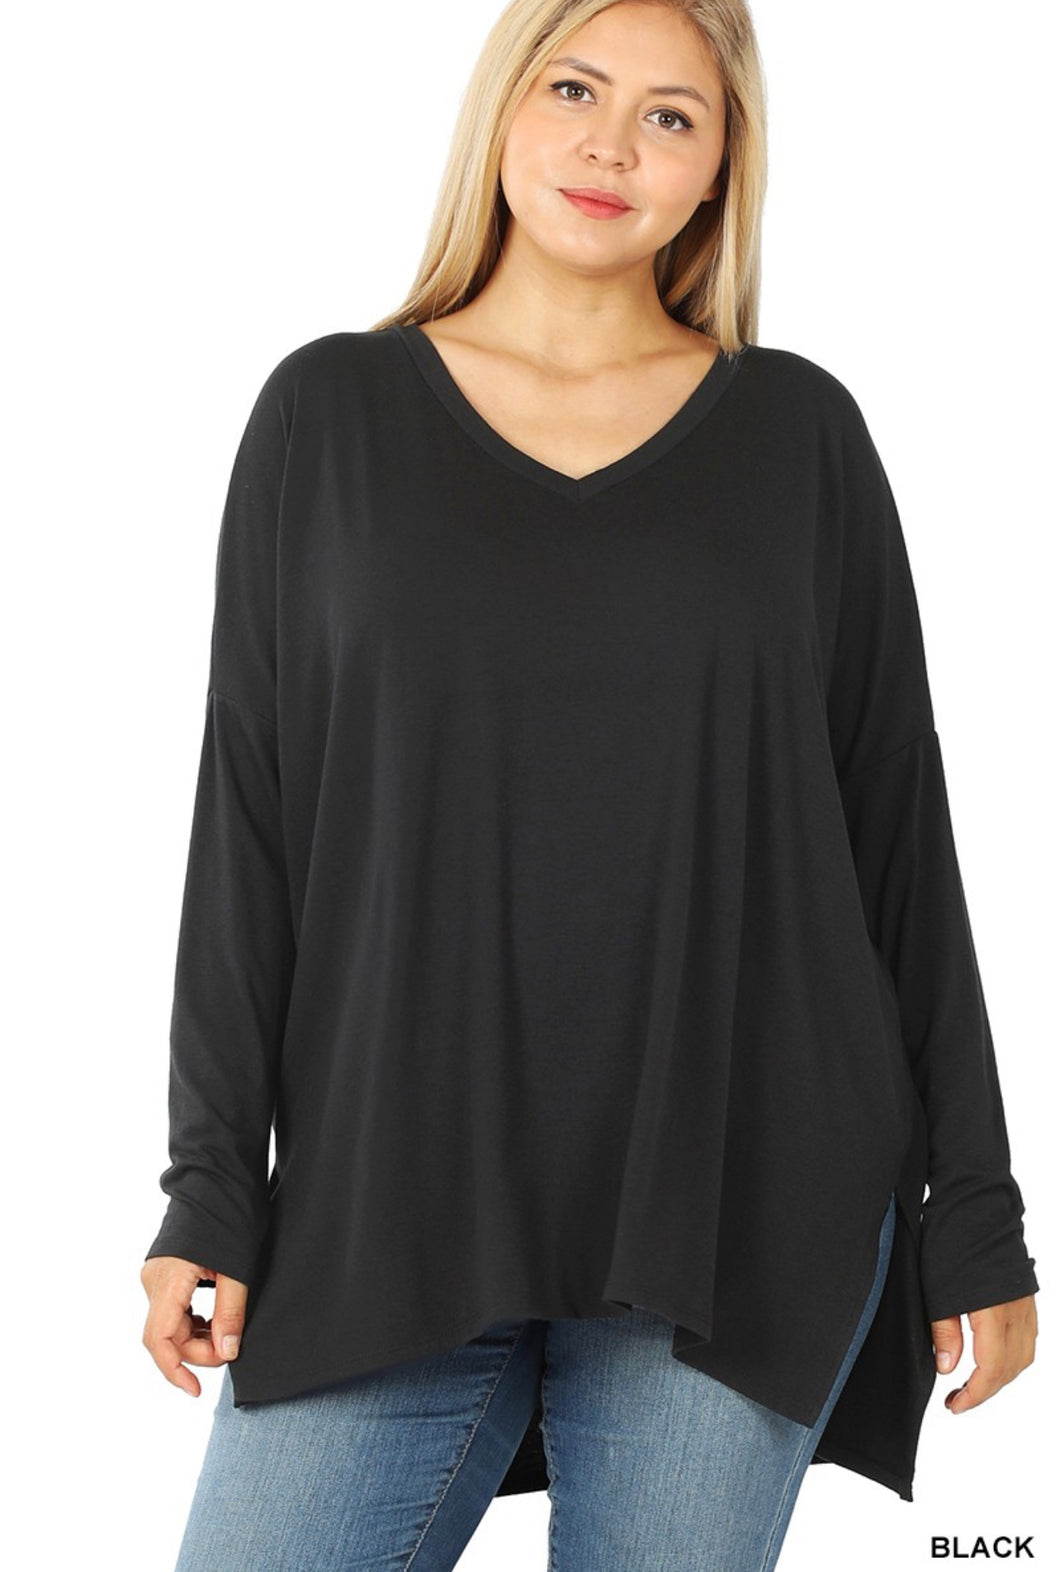 The Dory curvy Top